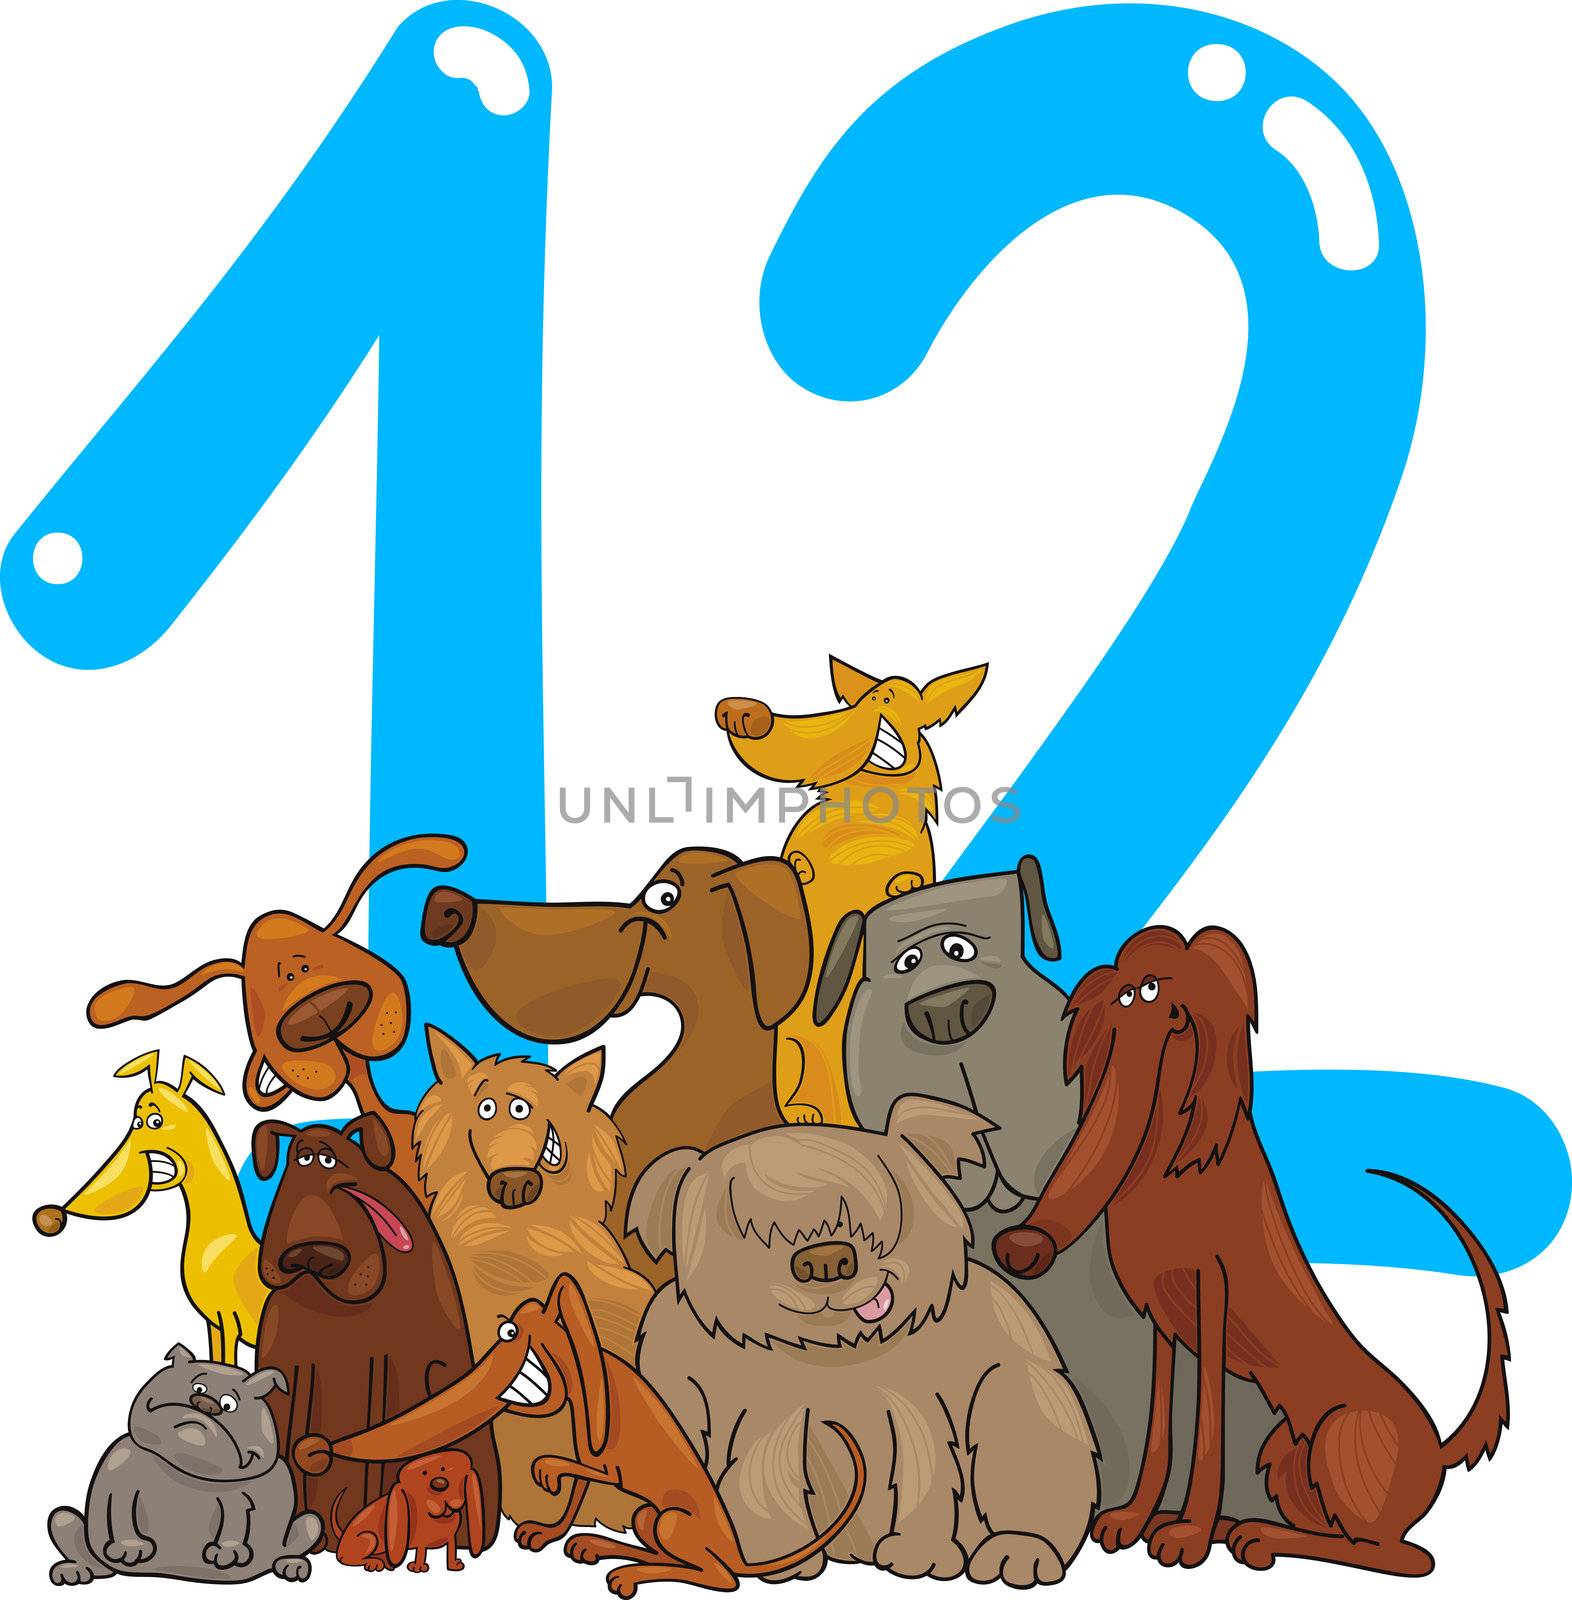 cartoon illustration with number twelve and dogs